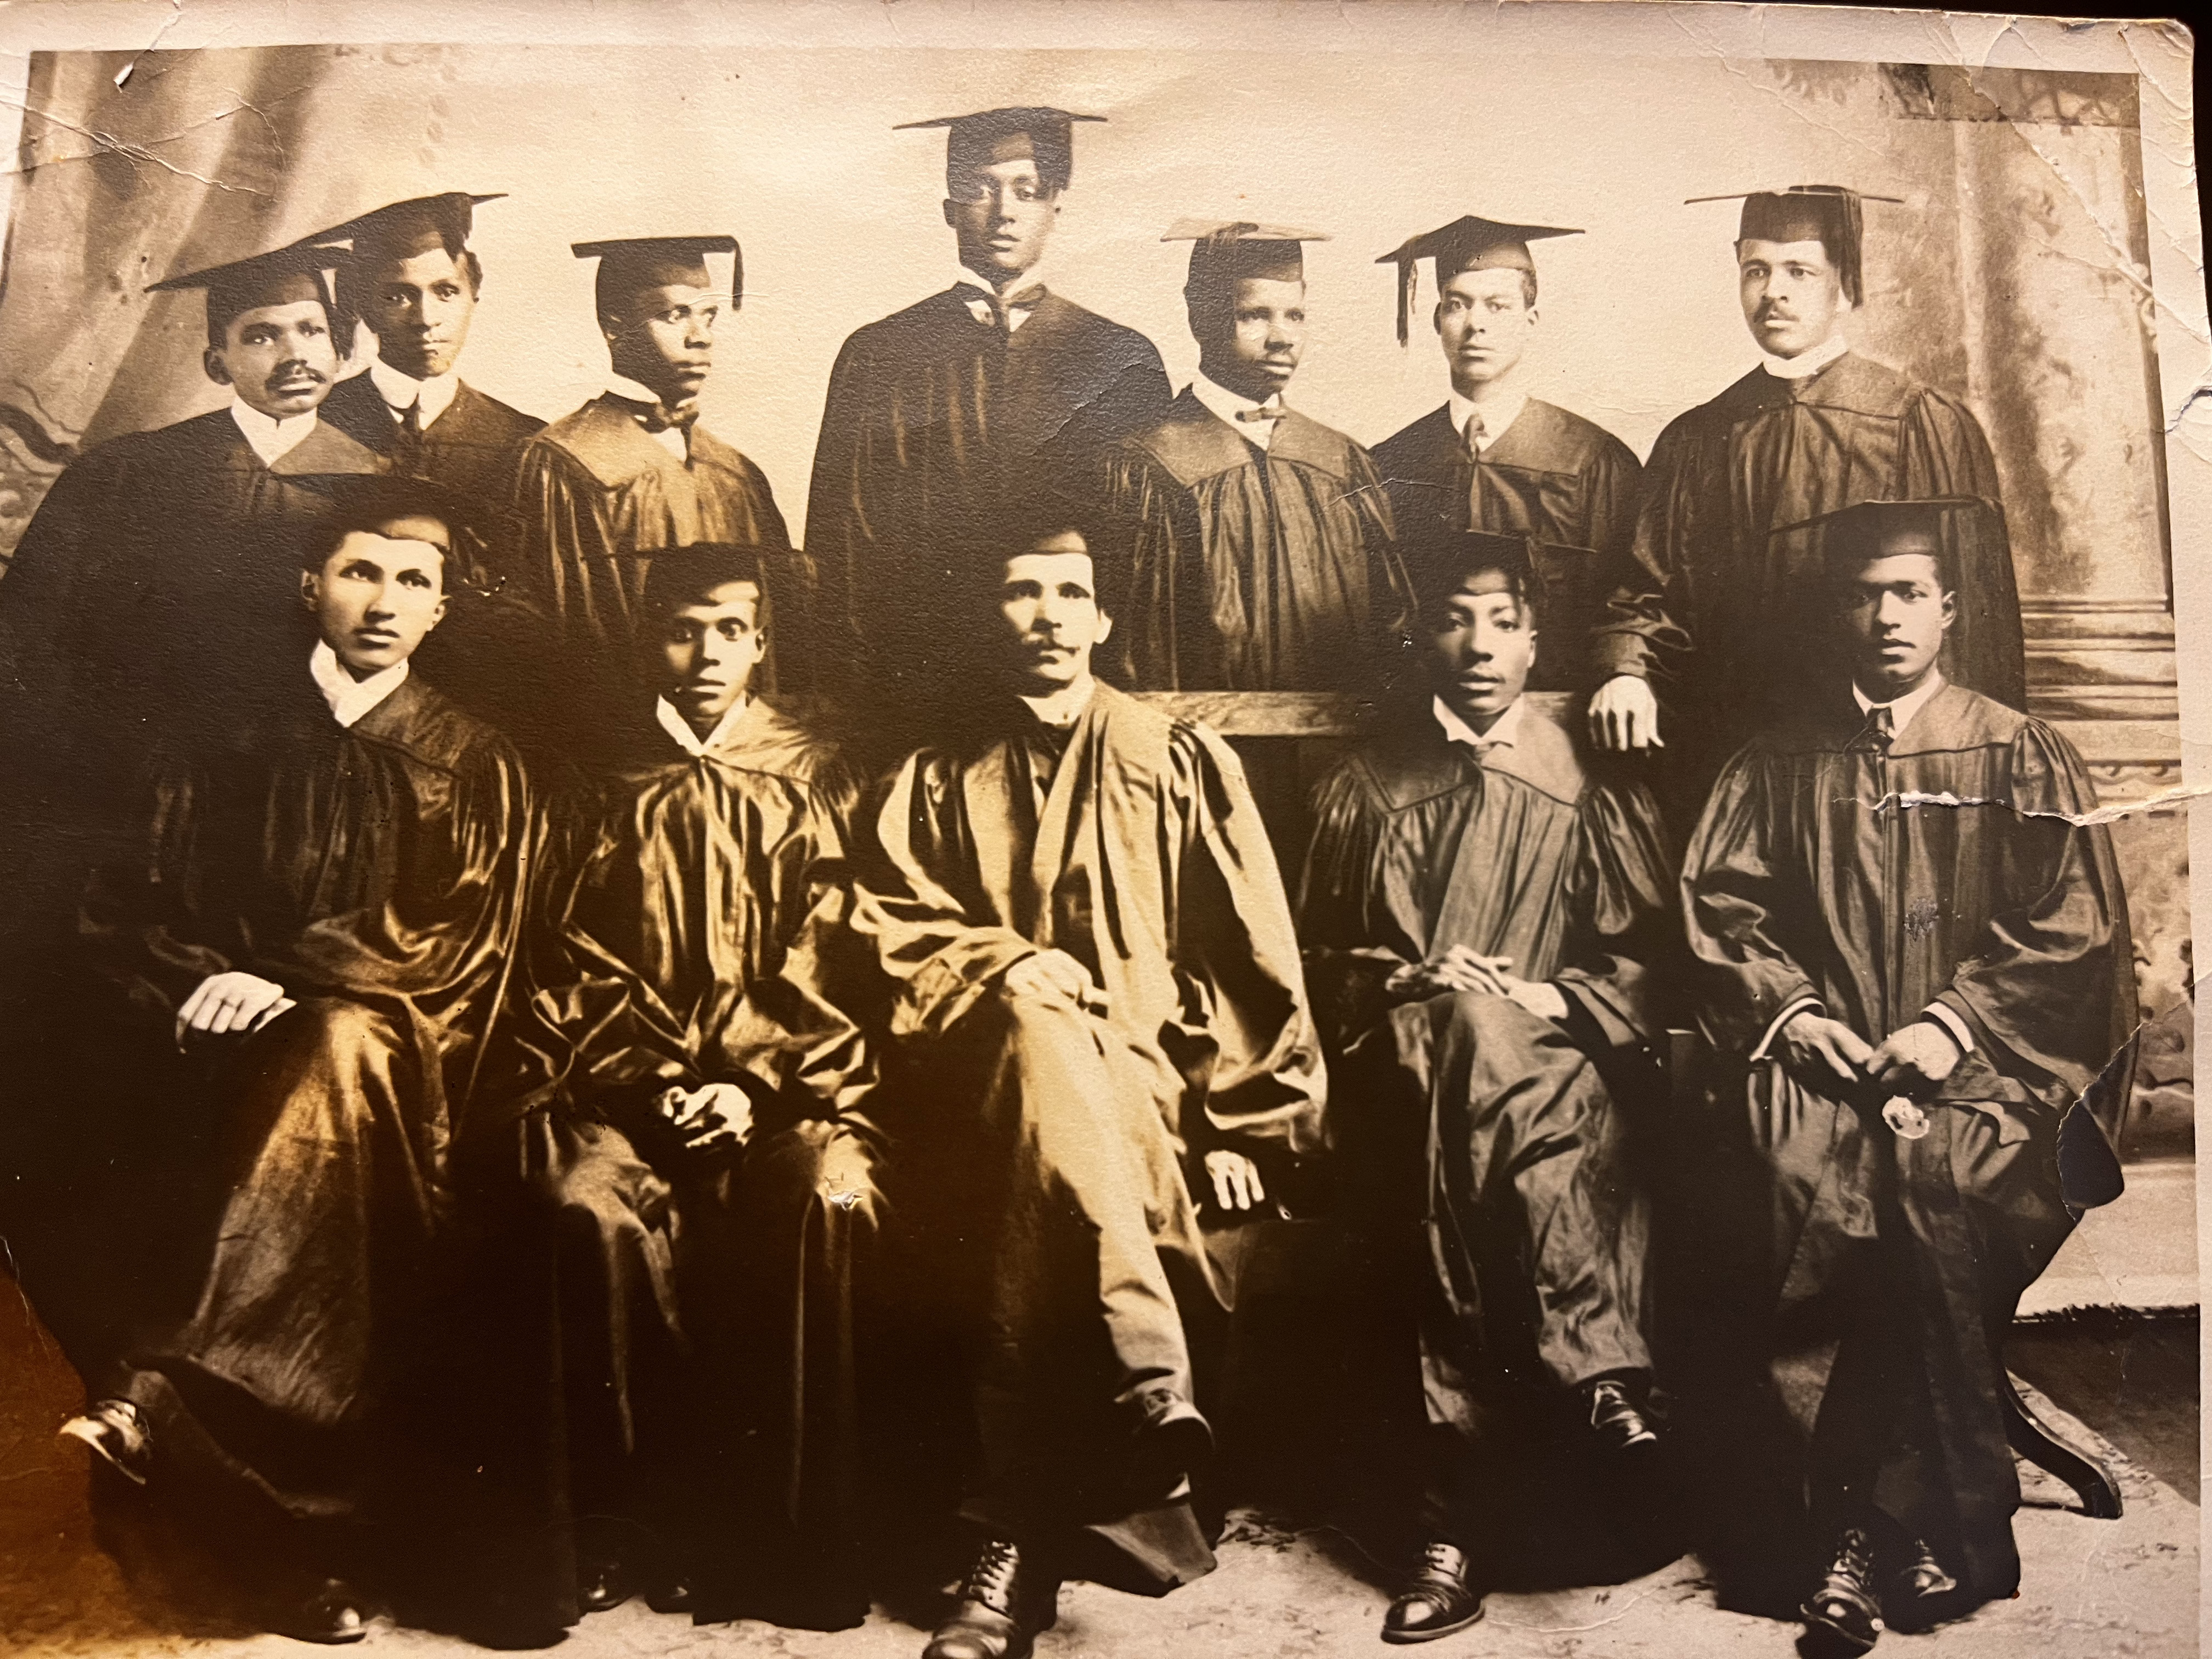 A black and white photo of a group of graduates in caps and gowns.